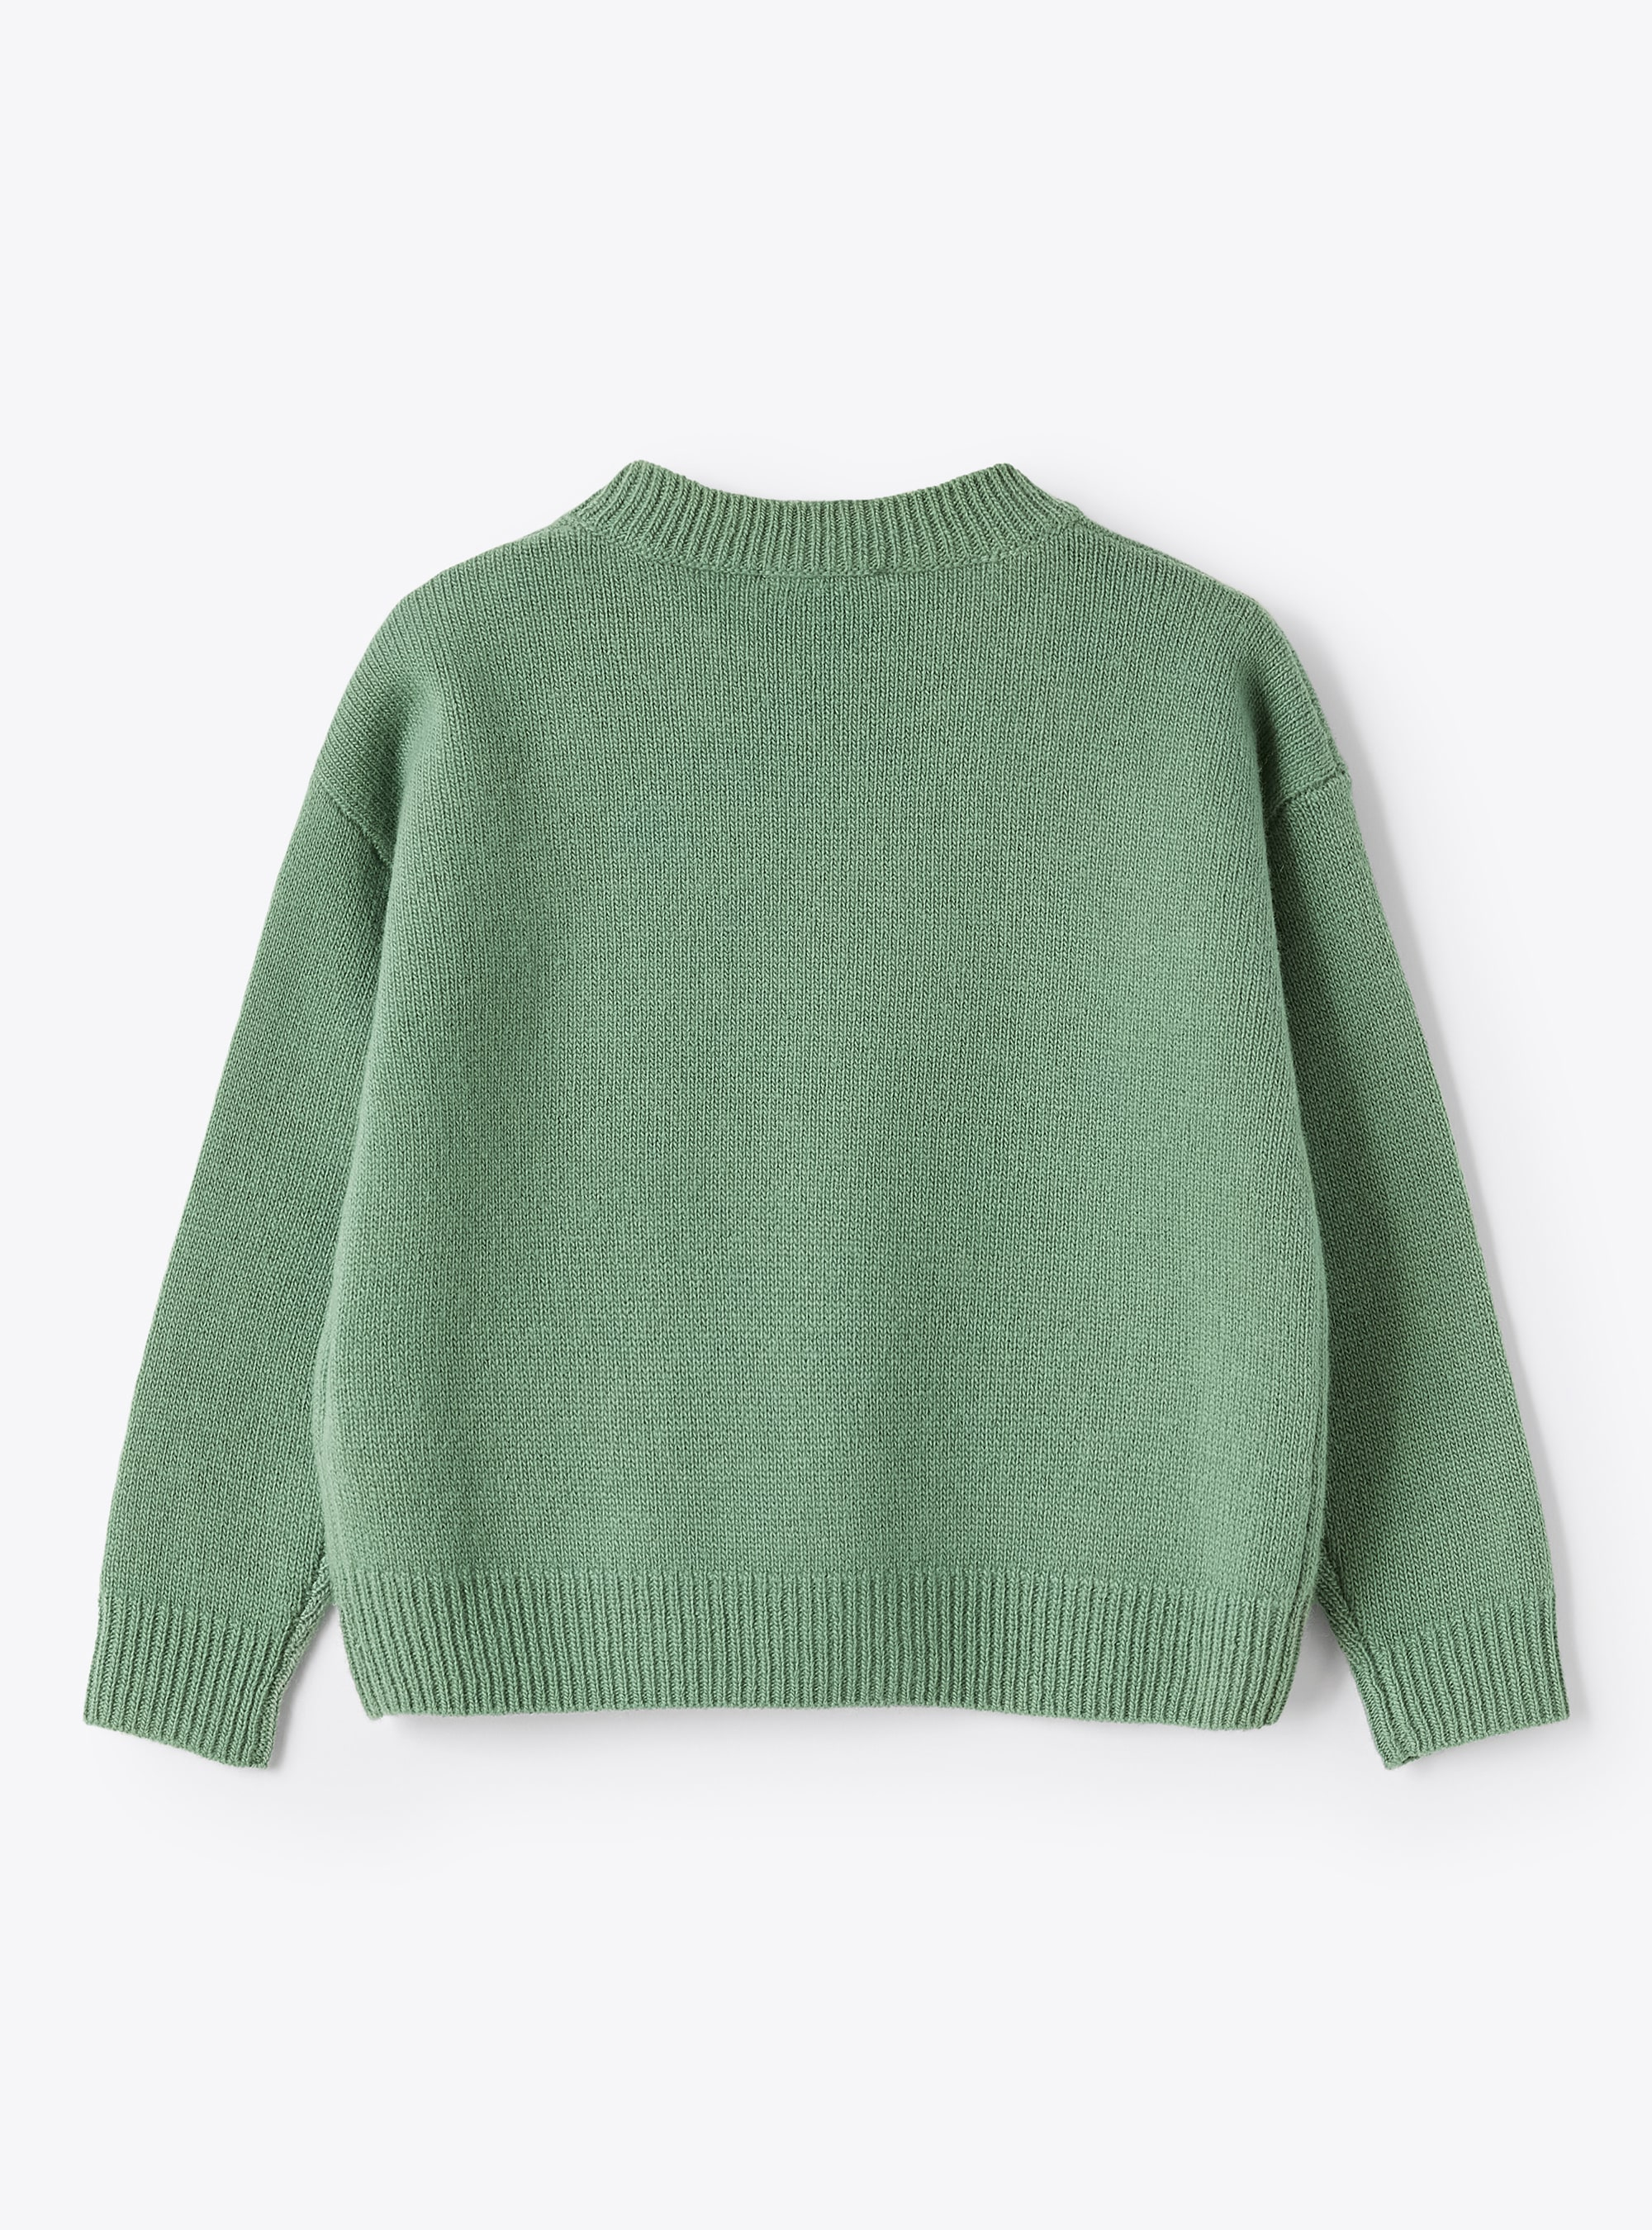 Flower embroidery green sweater - Green | Il Gufo